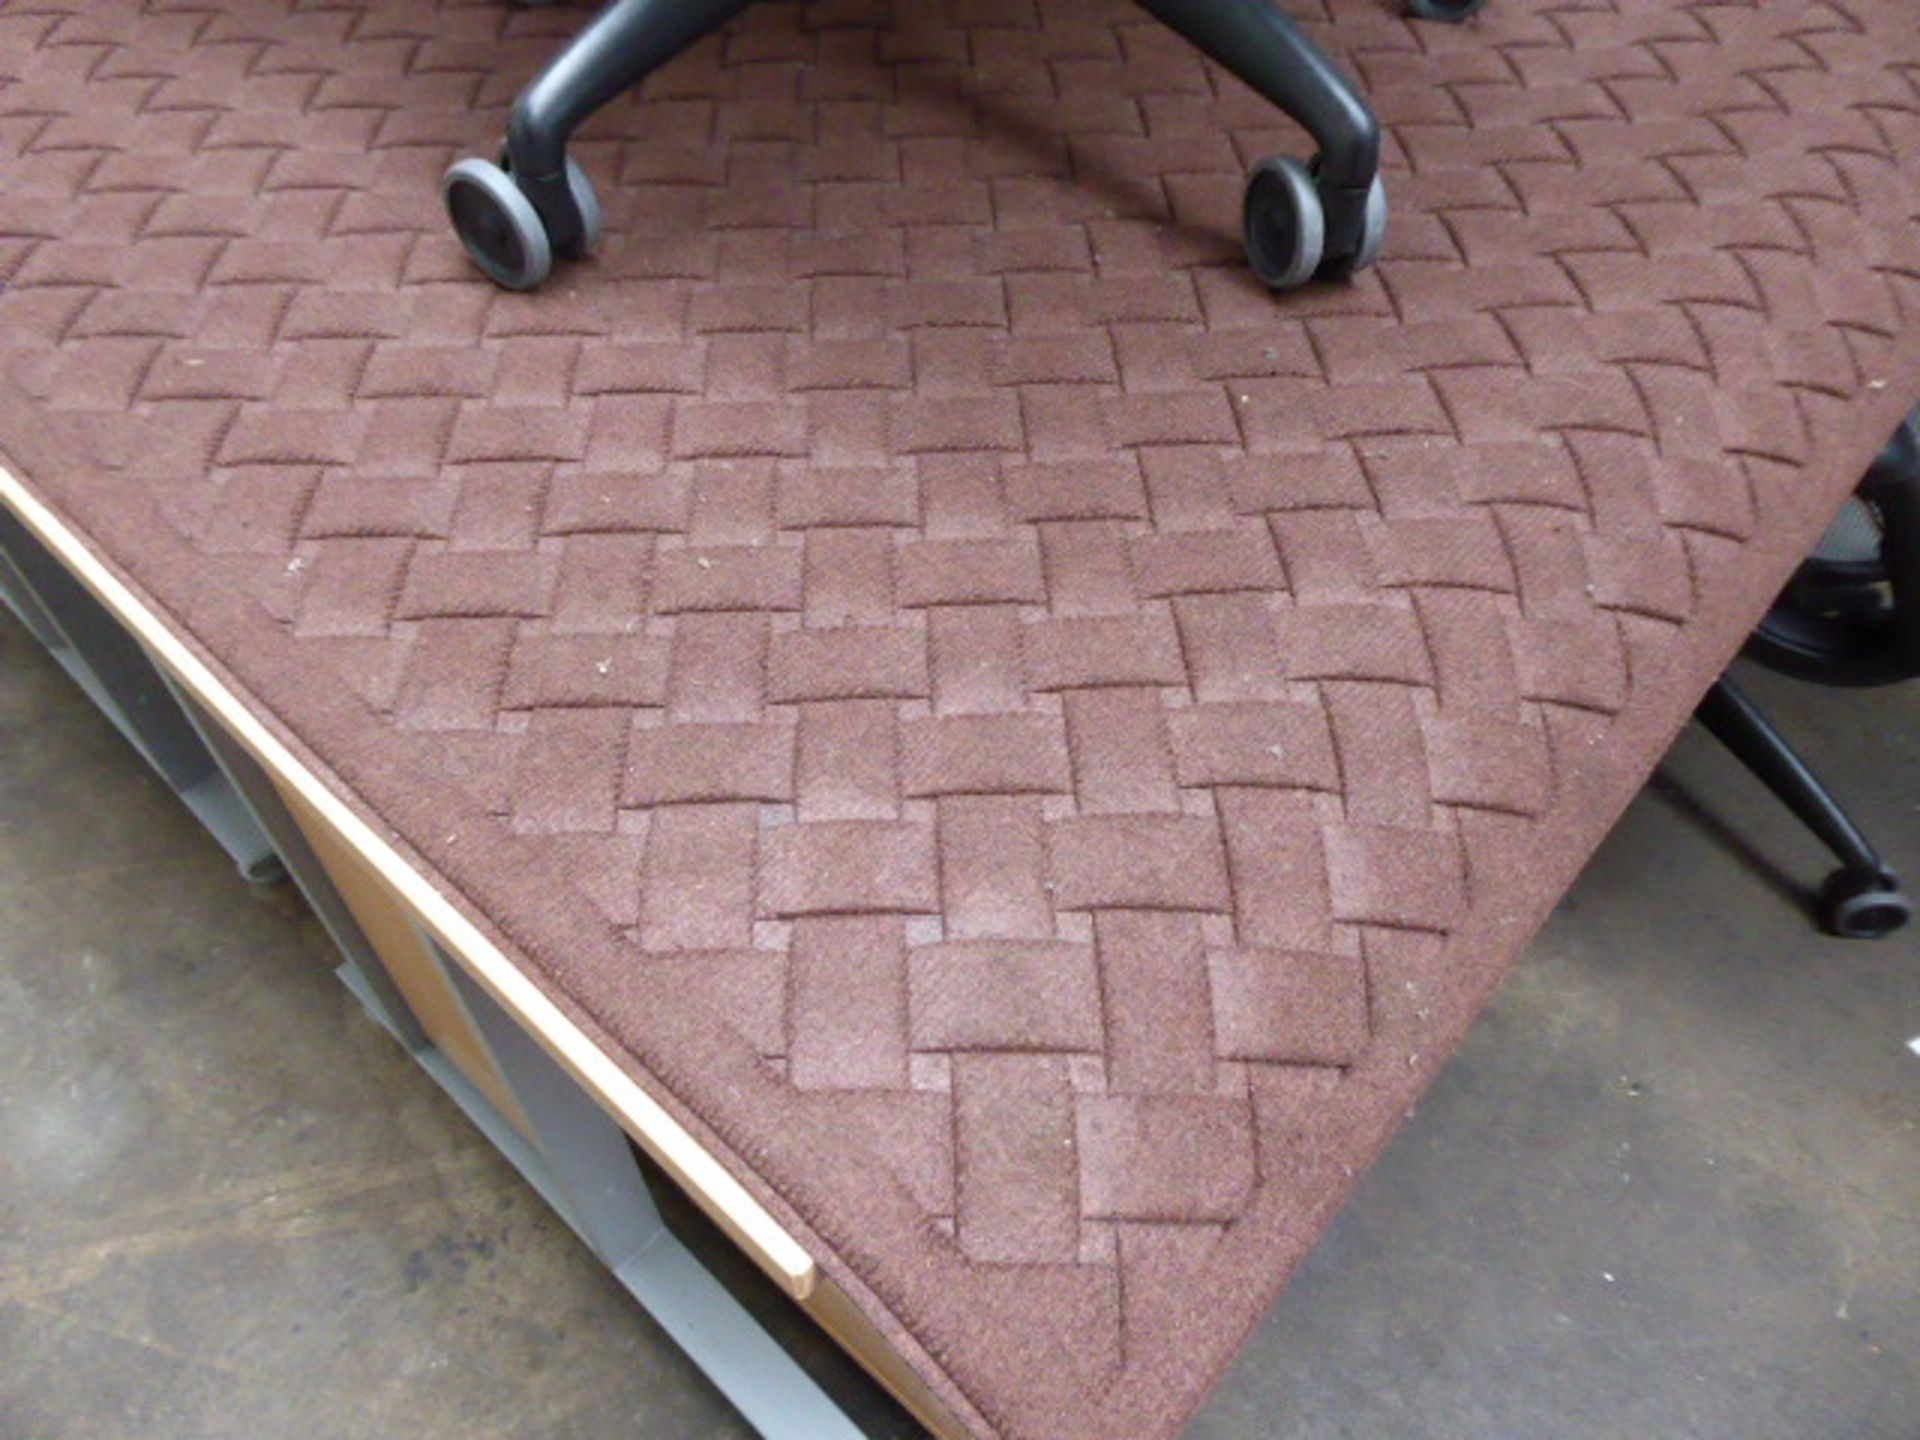 120 cm x 180 cm rubber back mat in brown with woven fabric design - Image 2 of 2